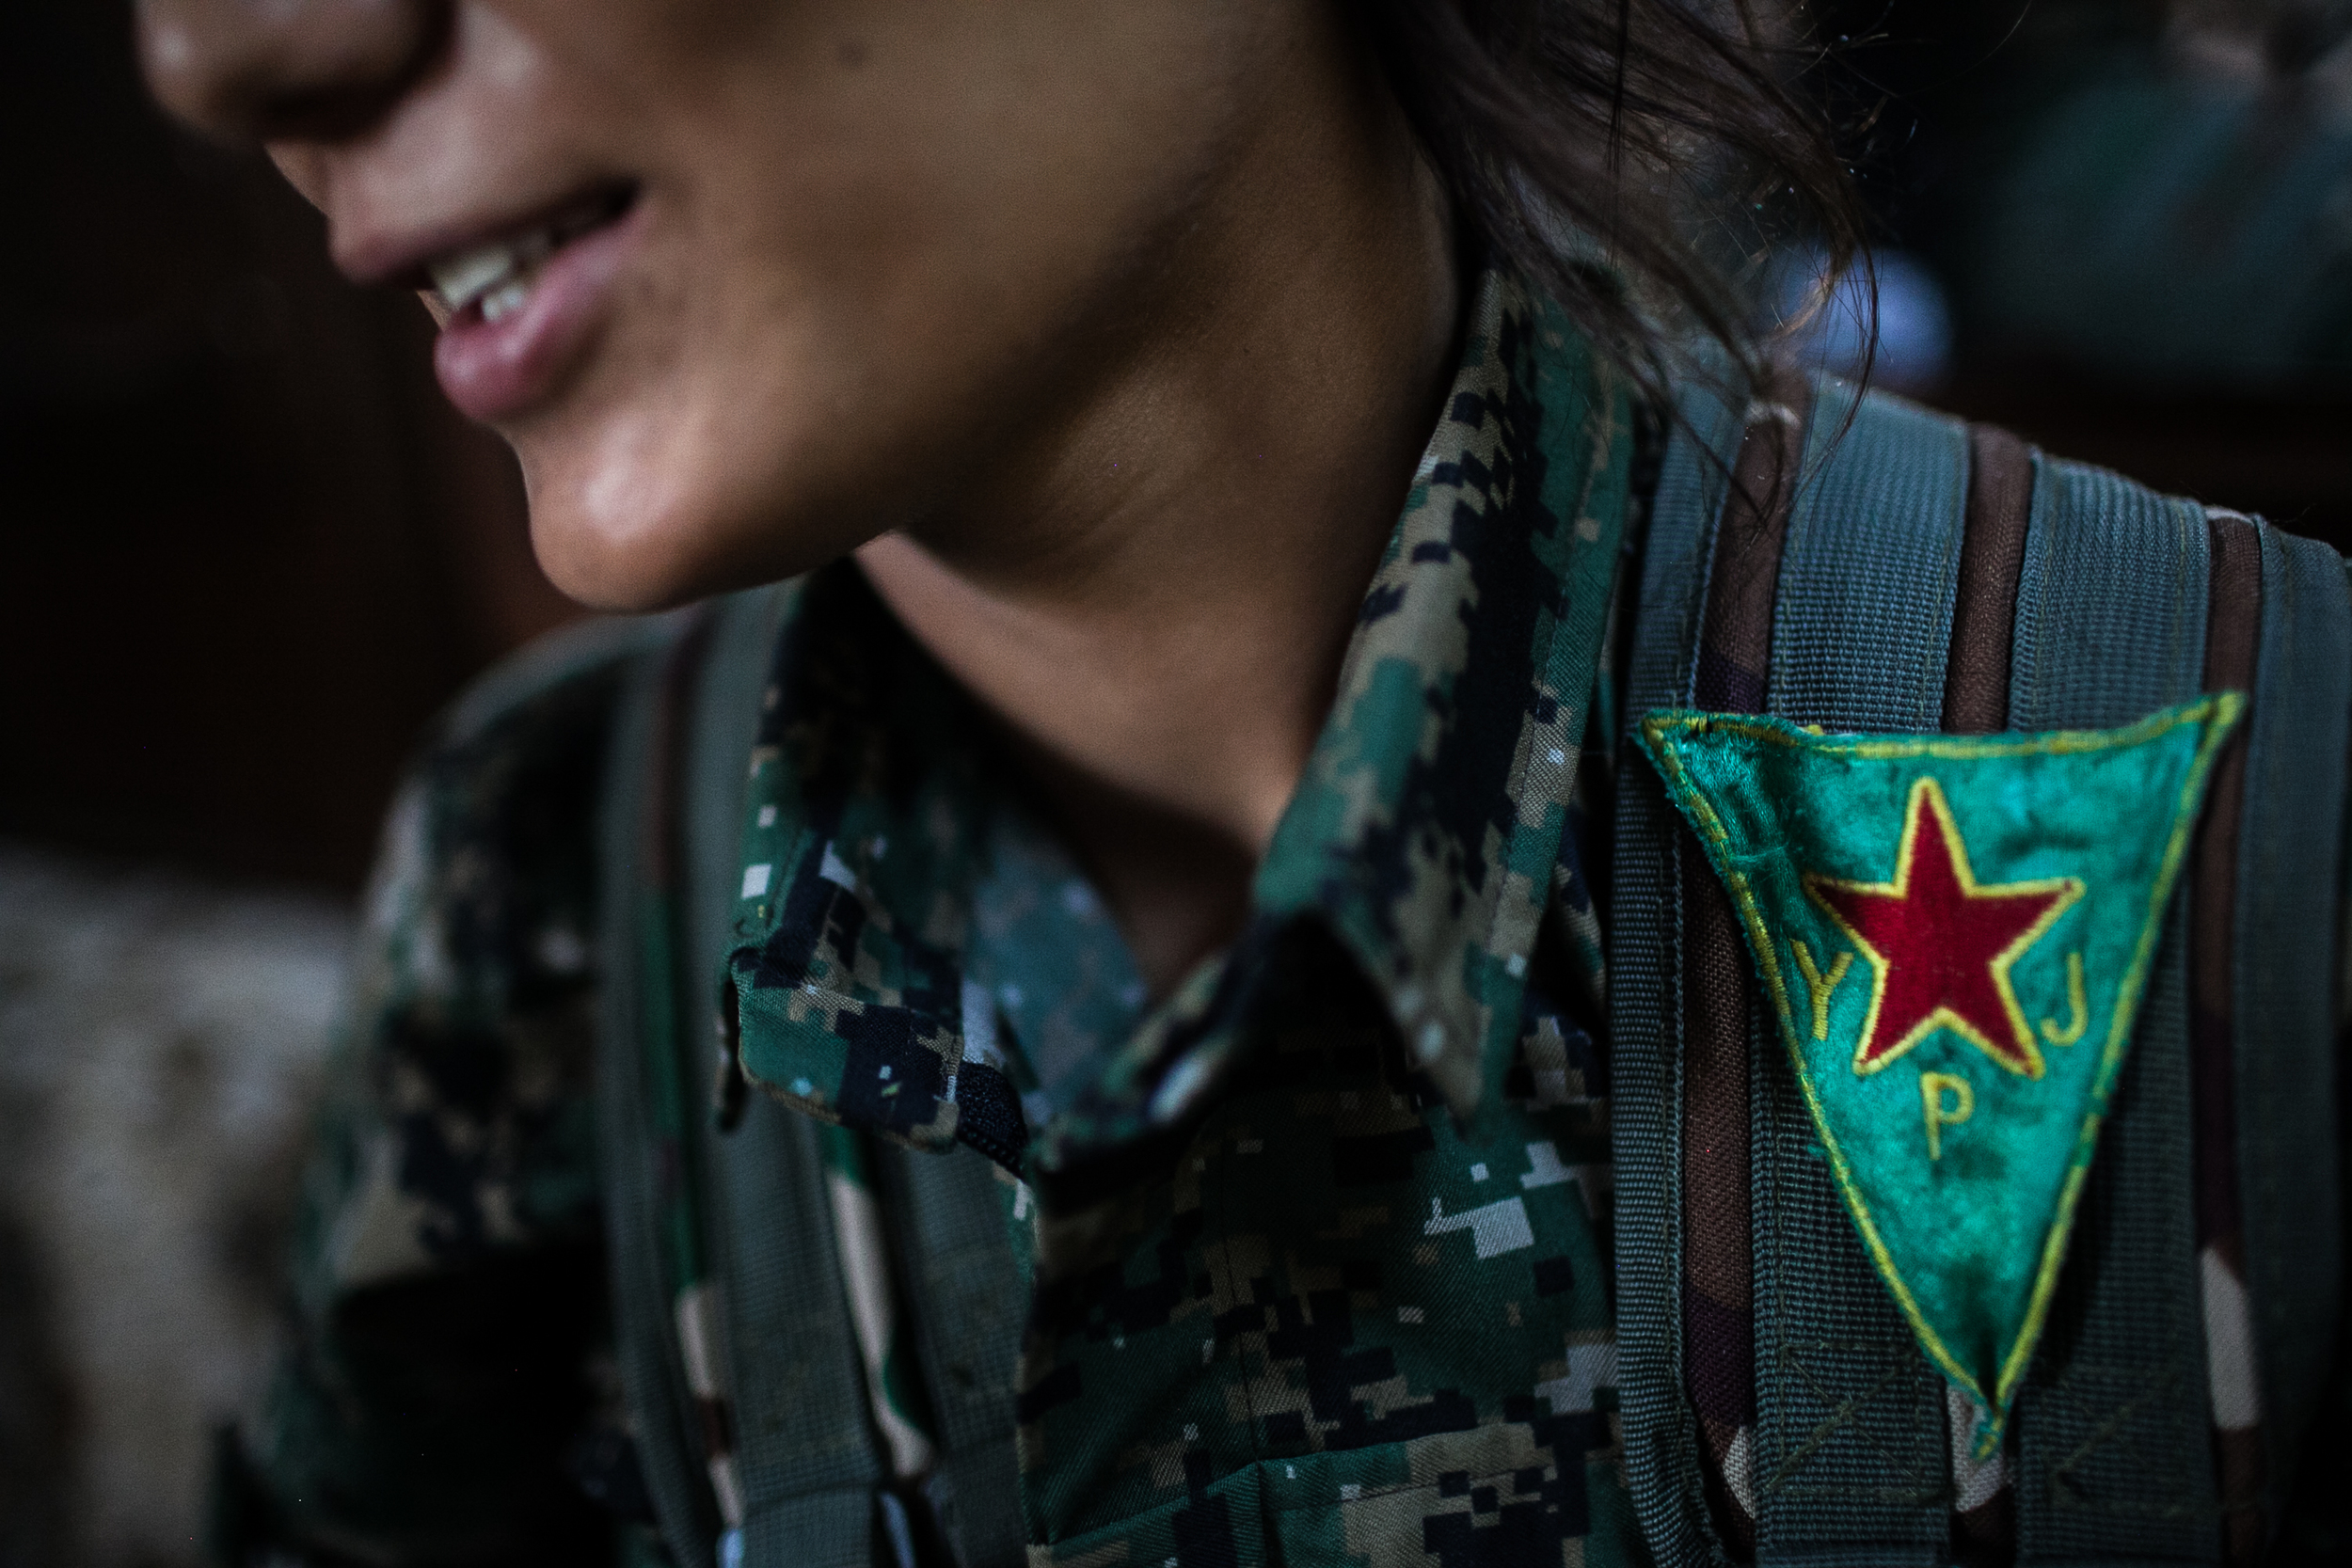  YPJ soldier, Amara, wears a red, yellow and green patch, the official flag of the YPJ, on her uniform near Girke Lege, Syria. 